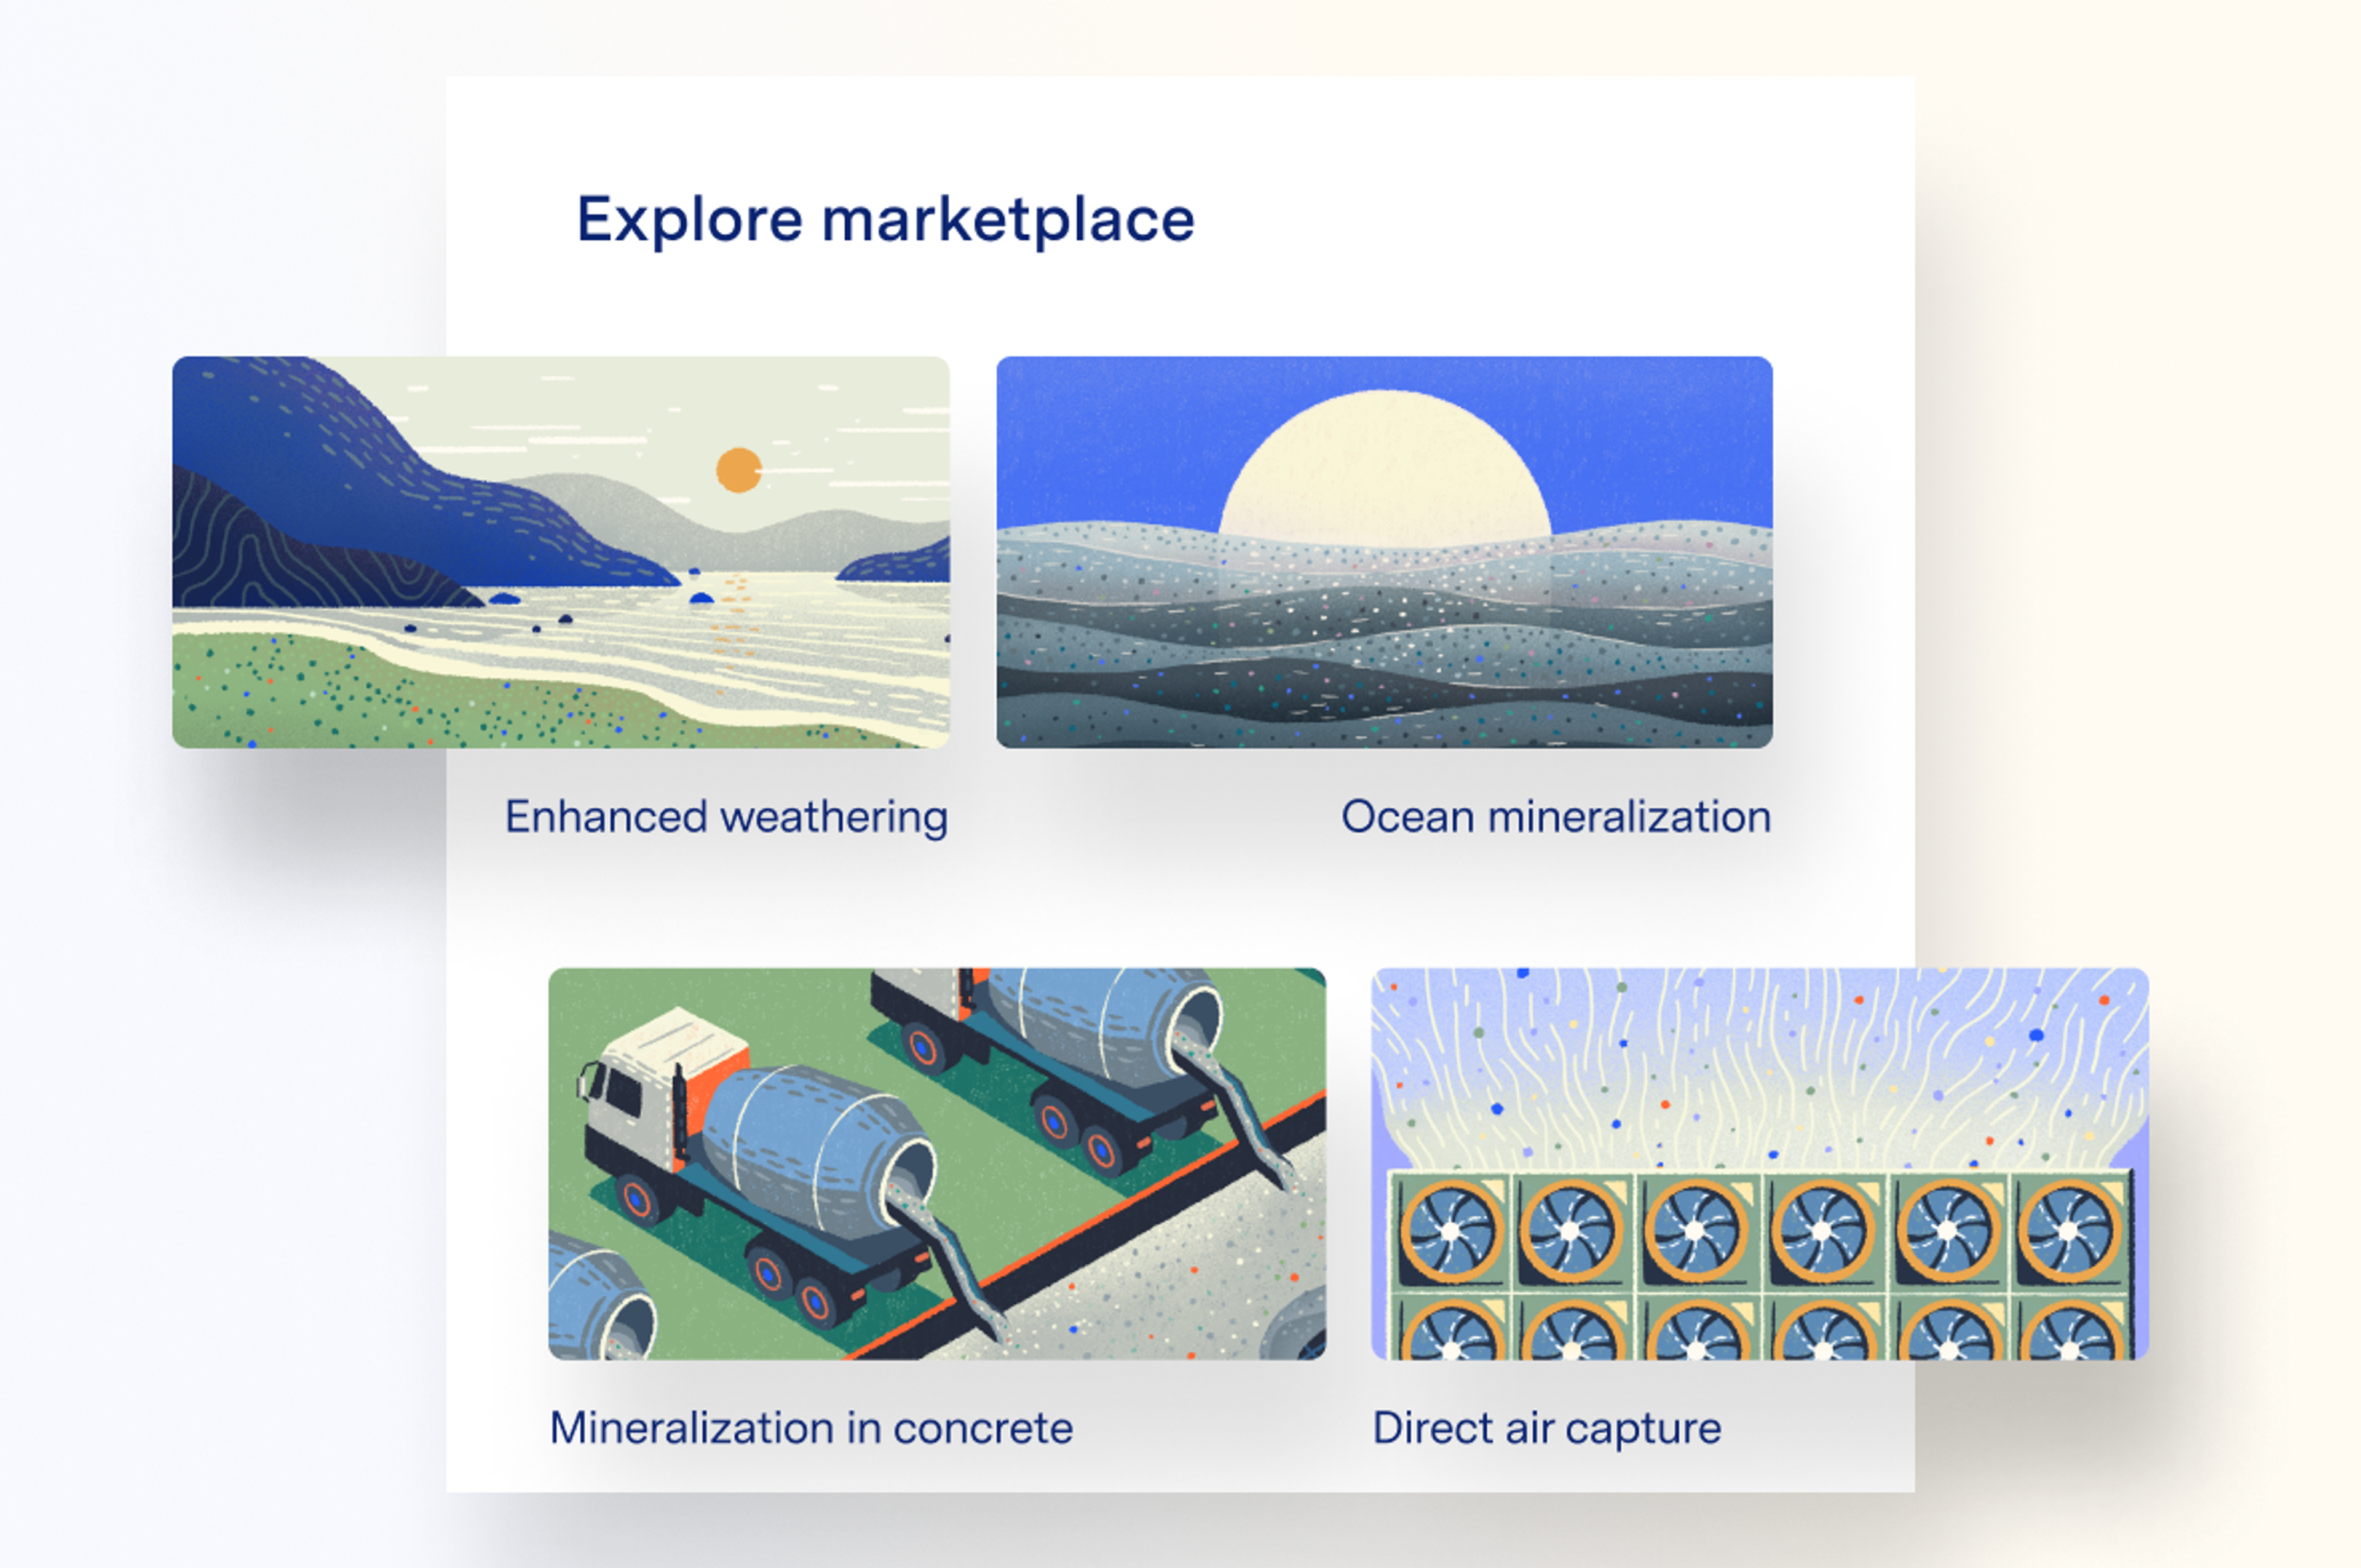 Marketplace graphics including Enhanced weathering, Ocean mineralization, Mineralization in concrete, and Direct air capture